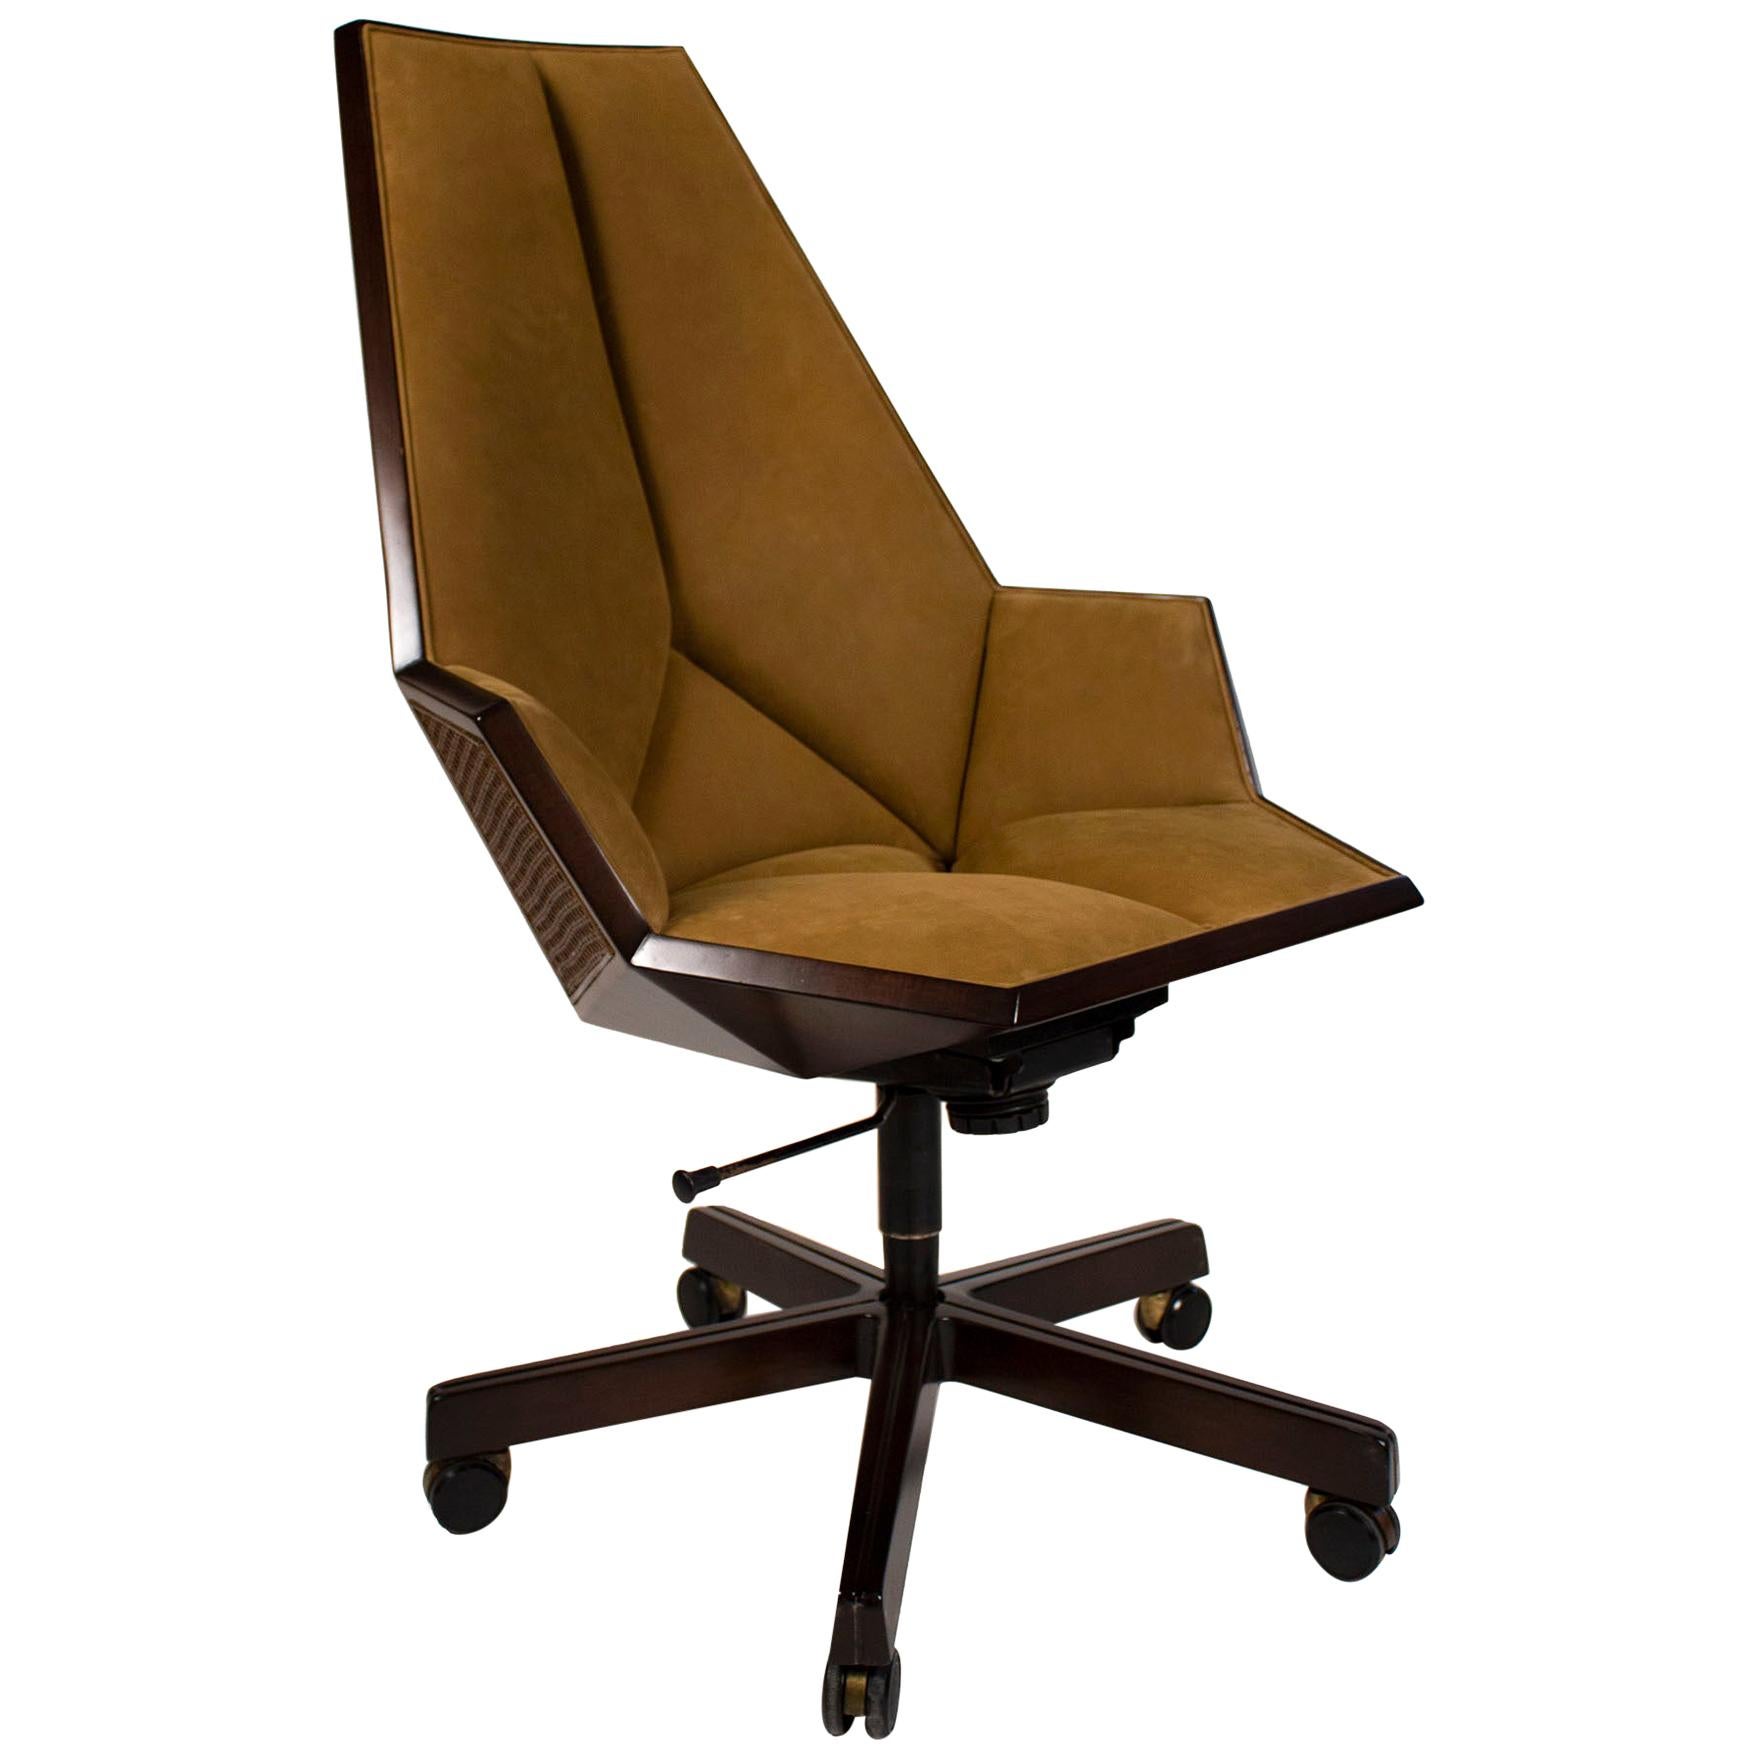 Pierre Paulin Executive Chair Model 1031 for Baker in Cane Mahogany & Suede